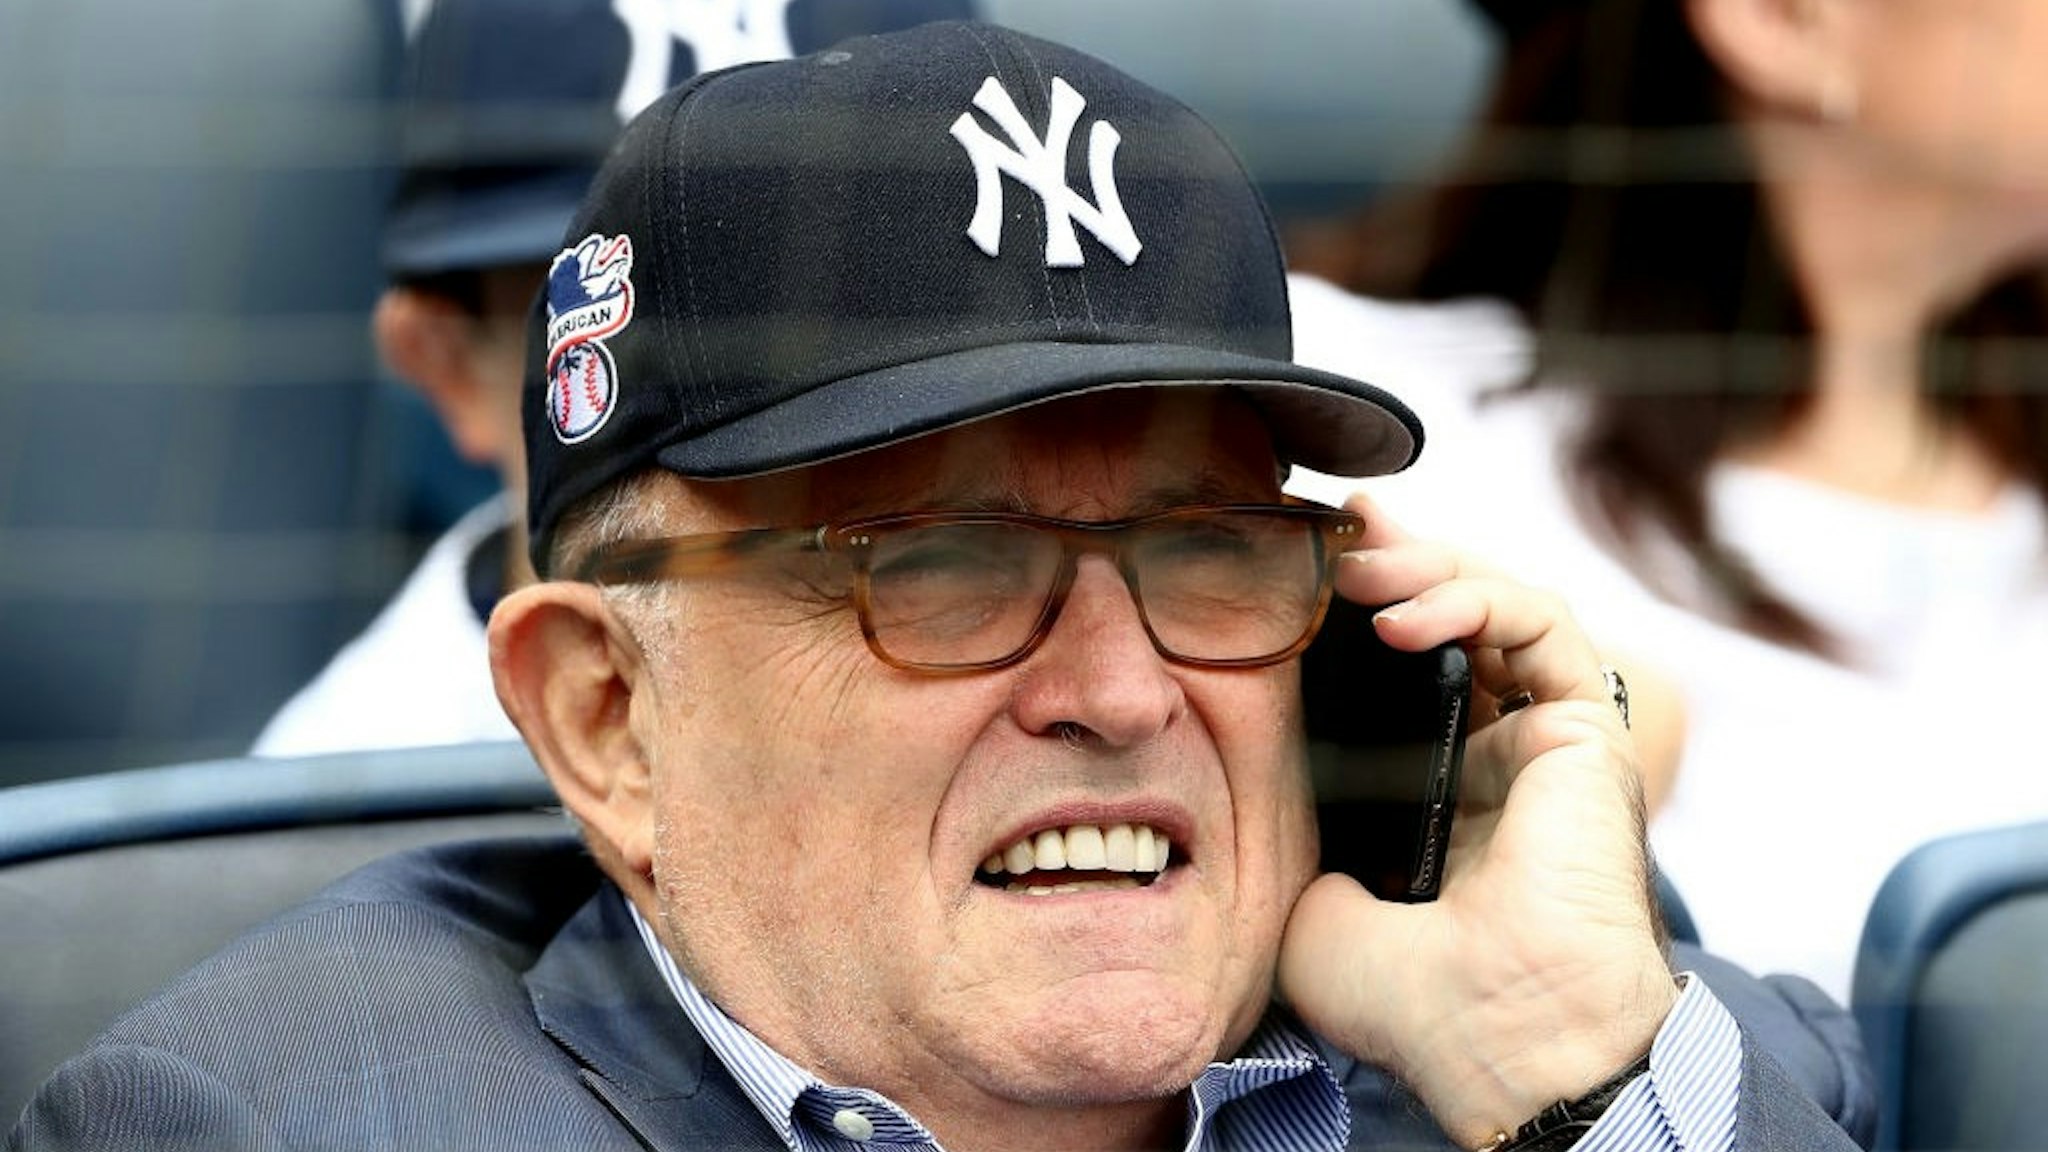 Rudy Giuliani, former New York City mayor and current lawyer for President Donald Trump, attends the game between the New York Yankees and the Houston Astros at Yankee Stadium on May 28, 2018 in the Bronx borough of New York City. MLB players across the league are wearing special uniforms to commemorate Memorial Day.